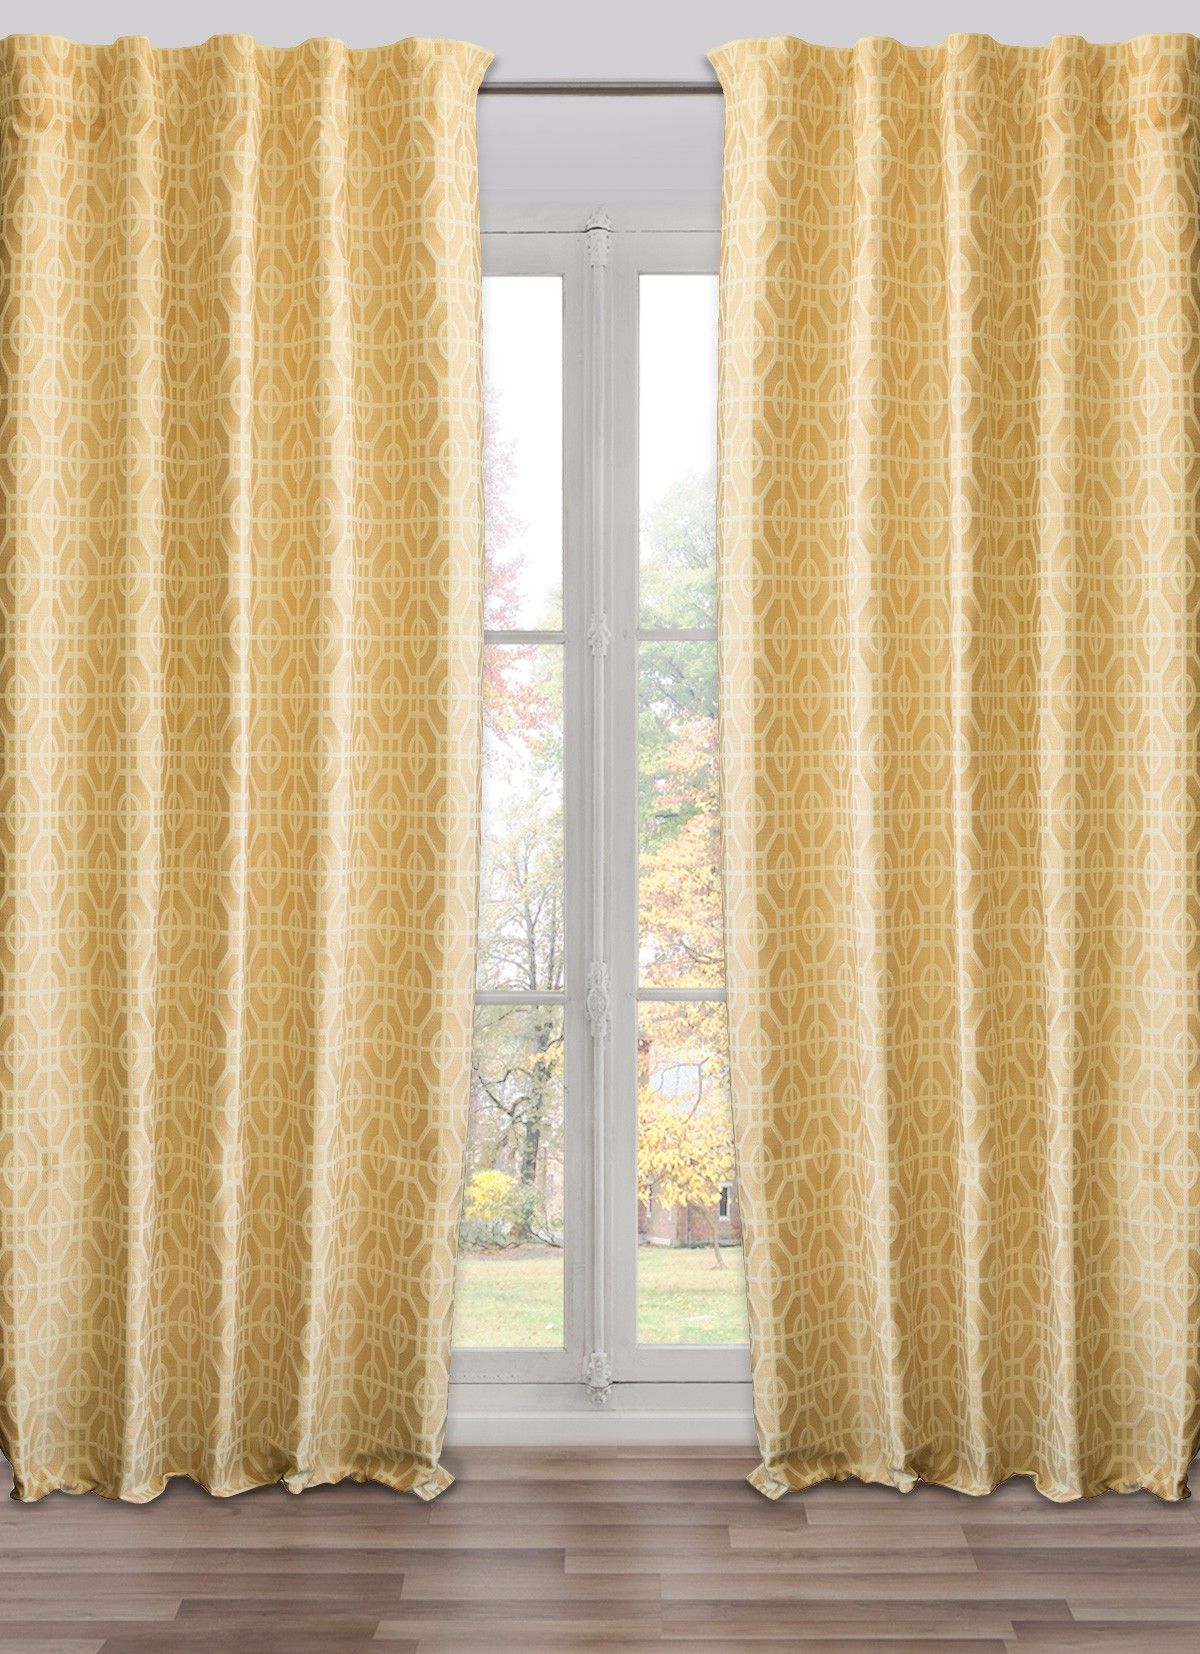 Ready Made, Fully Adjustable Drape Panel Fret Work Yellow – 50 X 118 Inches Inside Recent Fretwork Print Pattern Single Curtain Panels (View 20 of 20)